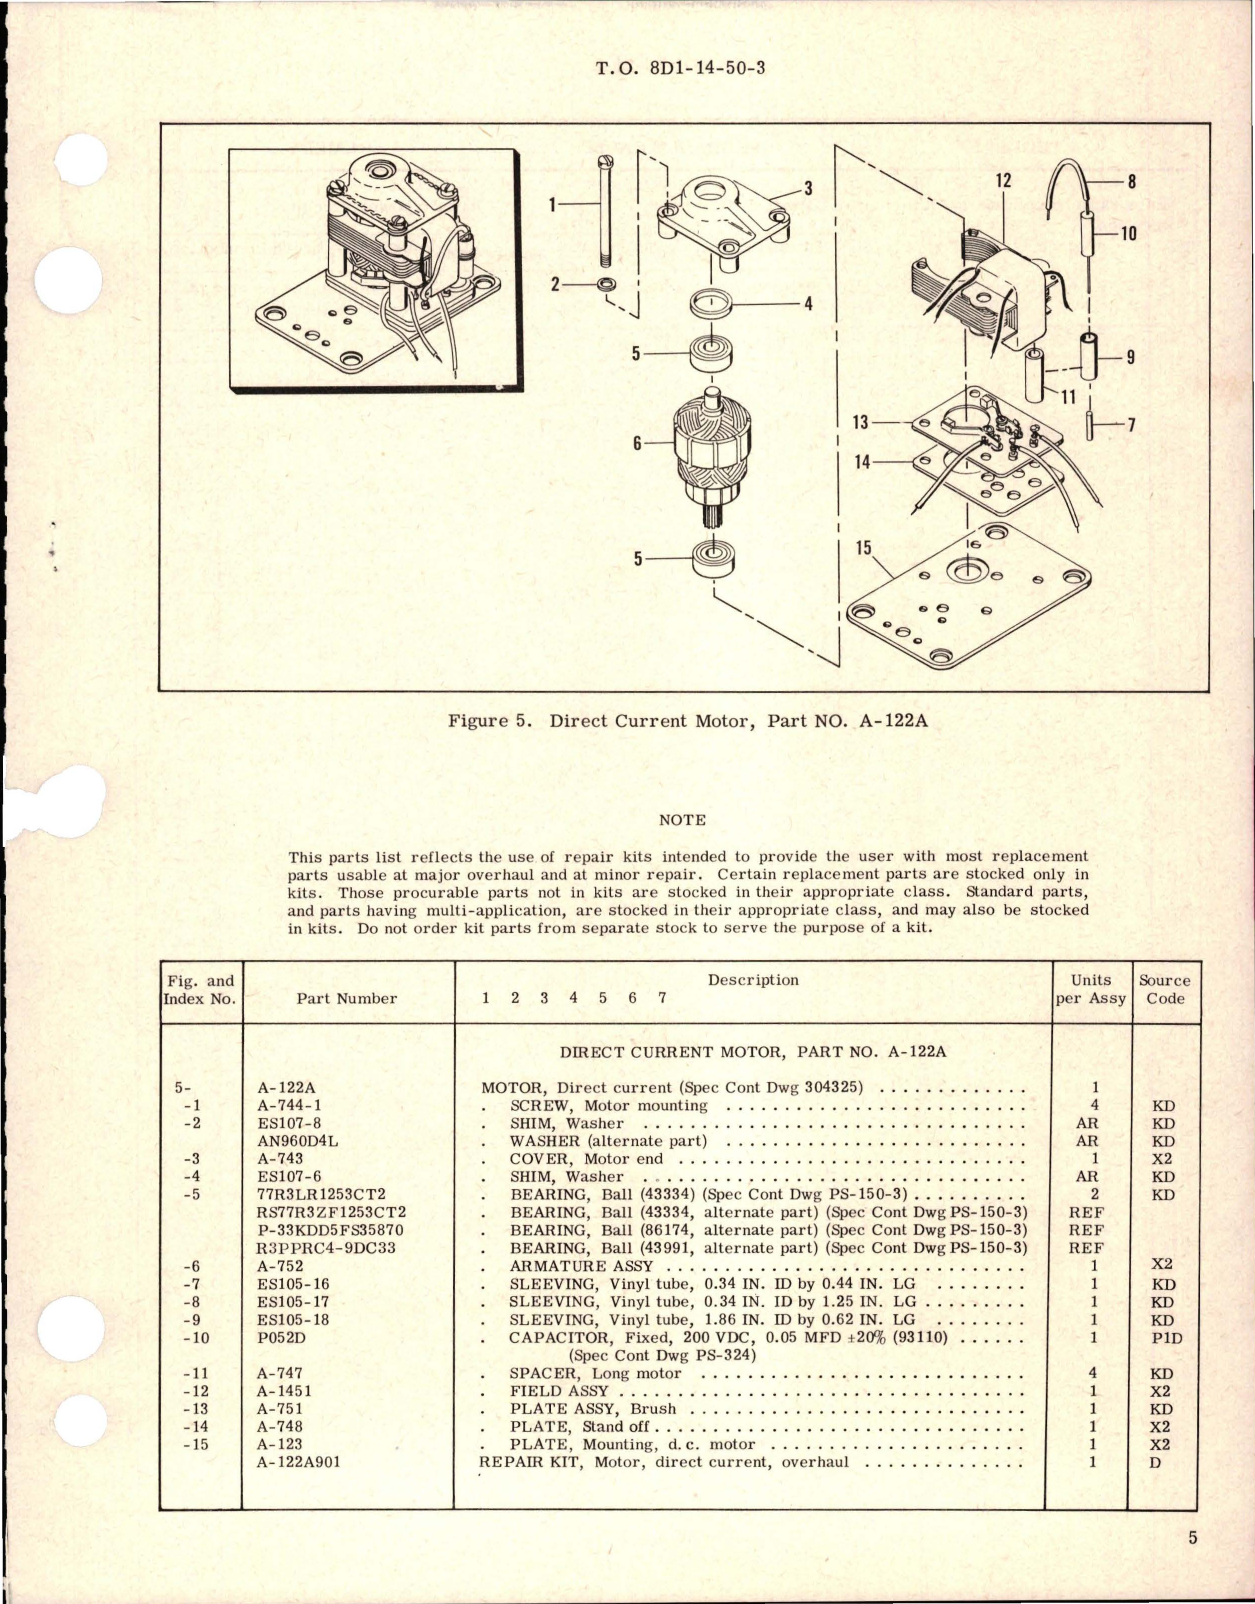 Sample page 5 from AirCorps Library document: Overhaul with Parts Breakdown for Direct Current Motor - Part A-122A